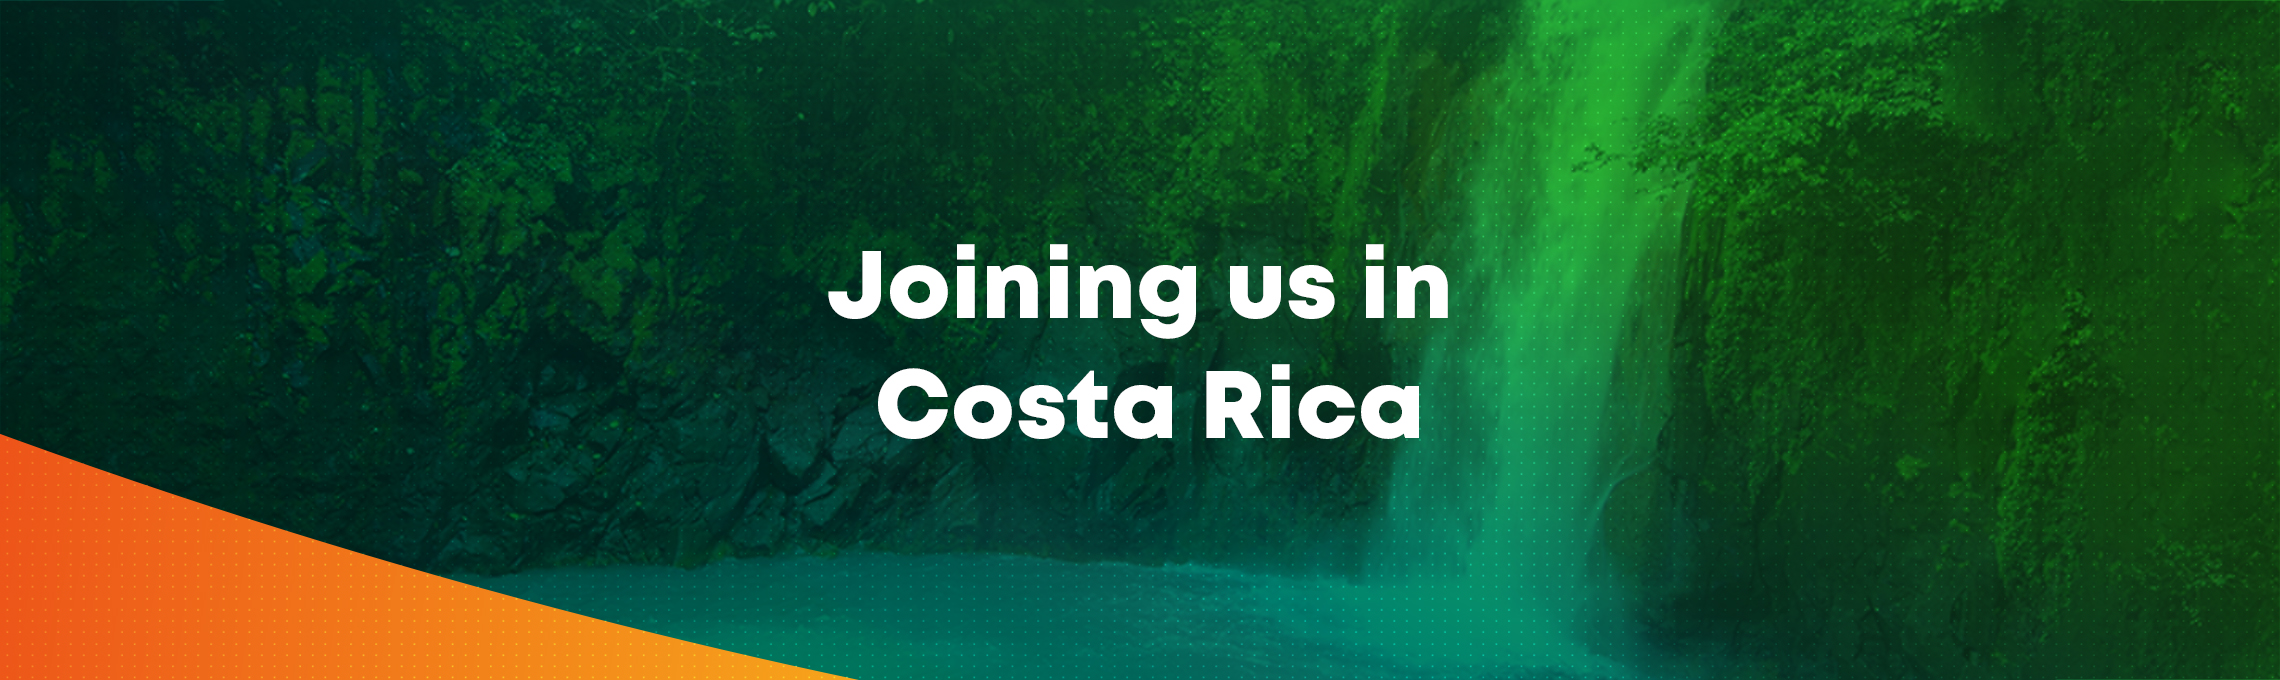 Section Title: Joining us in Costa Rica